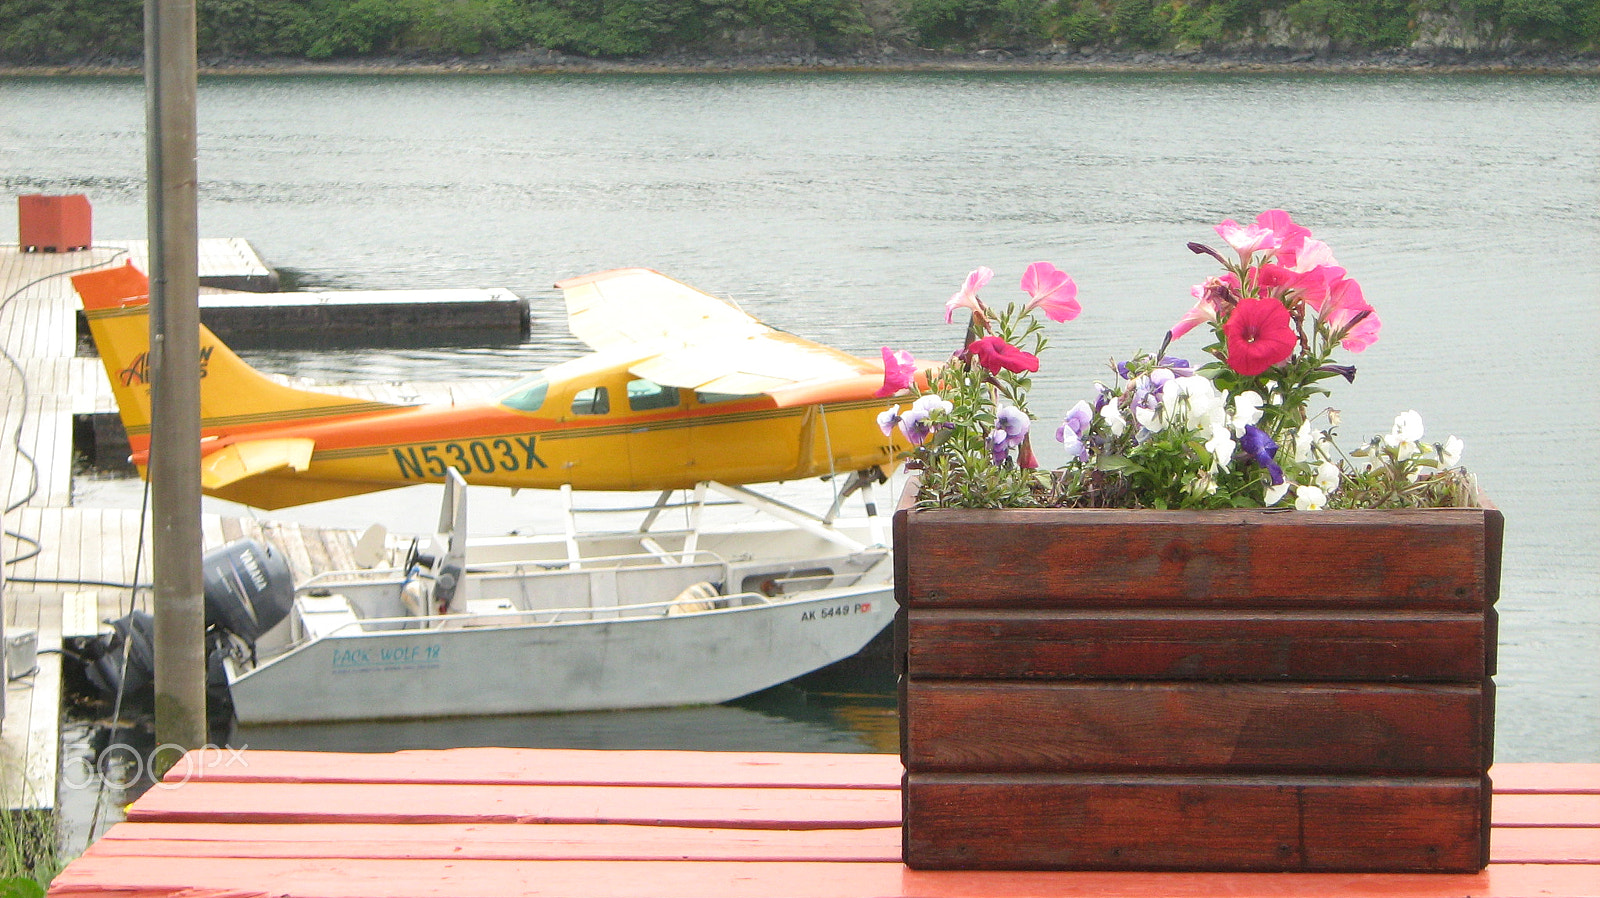 Canon POWERSHOT A460 sample photo. Flowers, aeroplane and boat photography